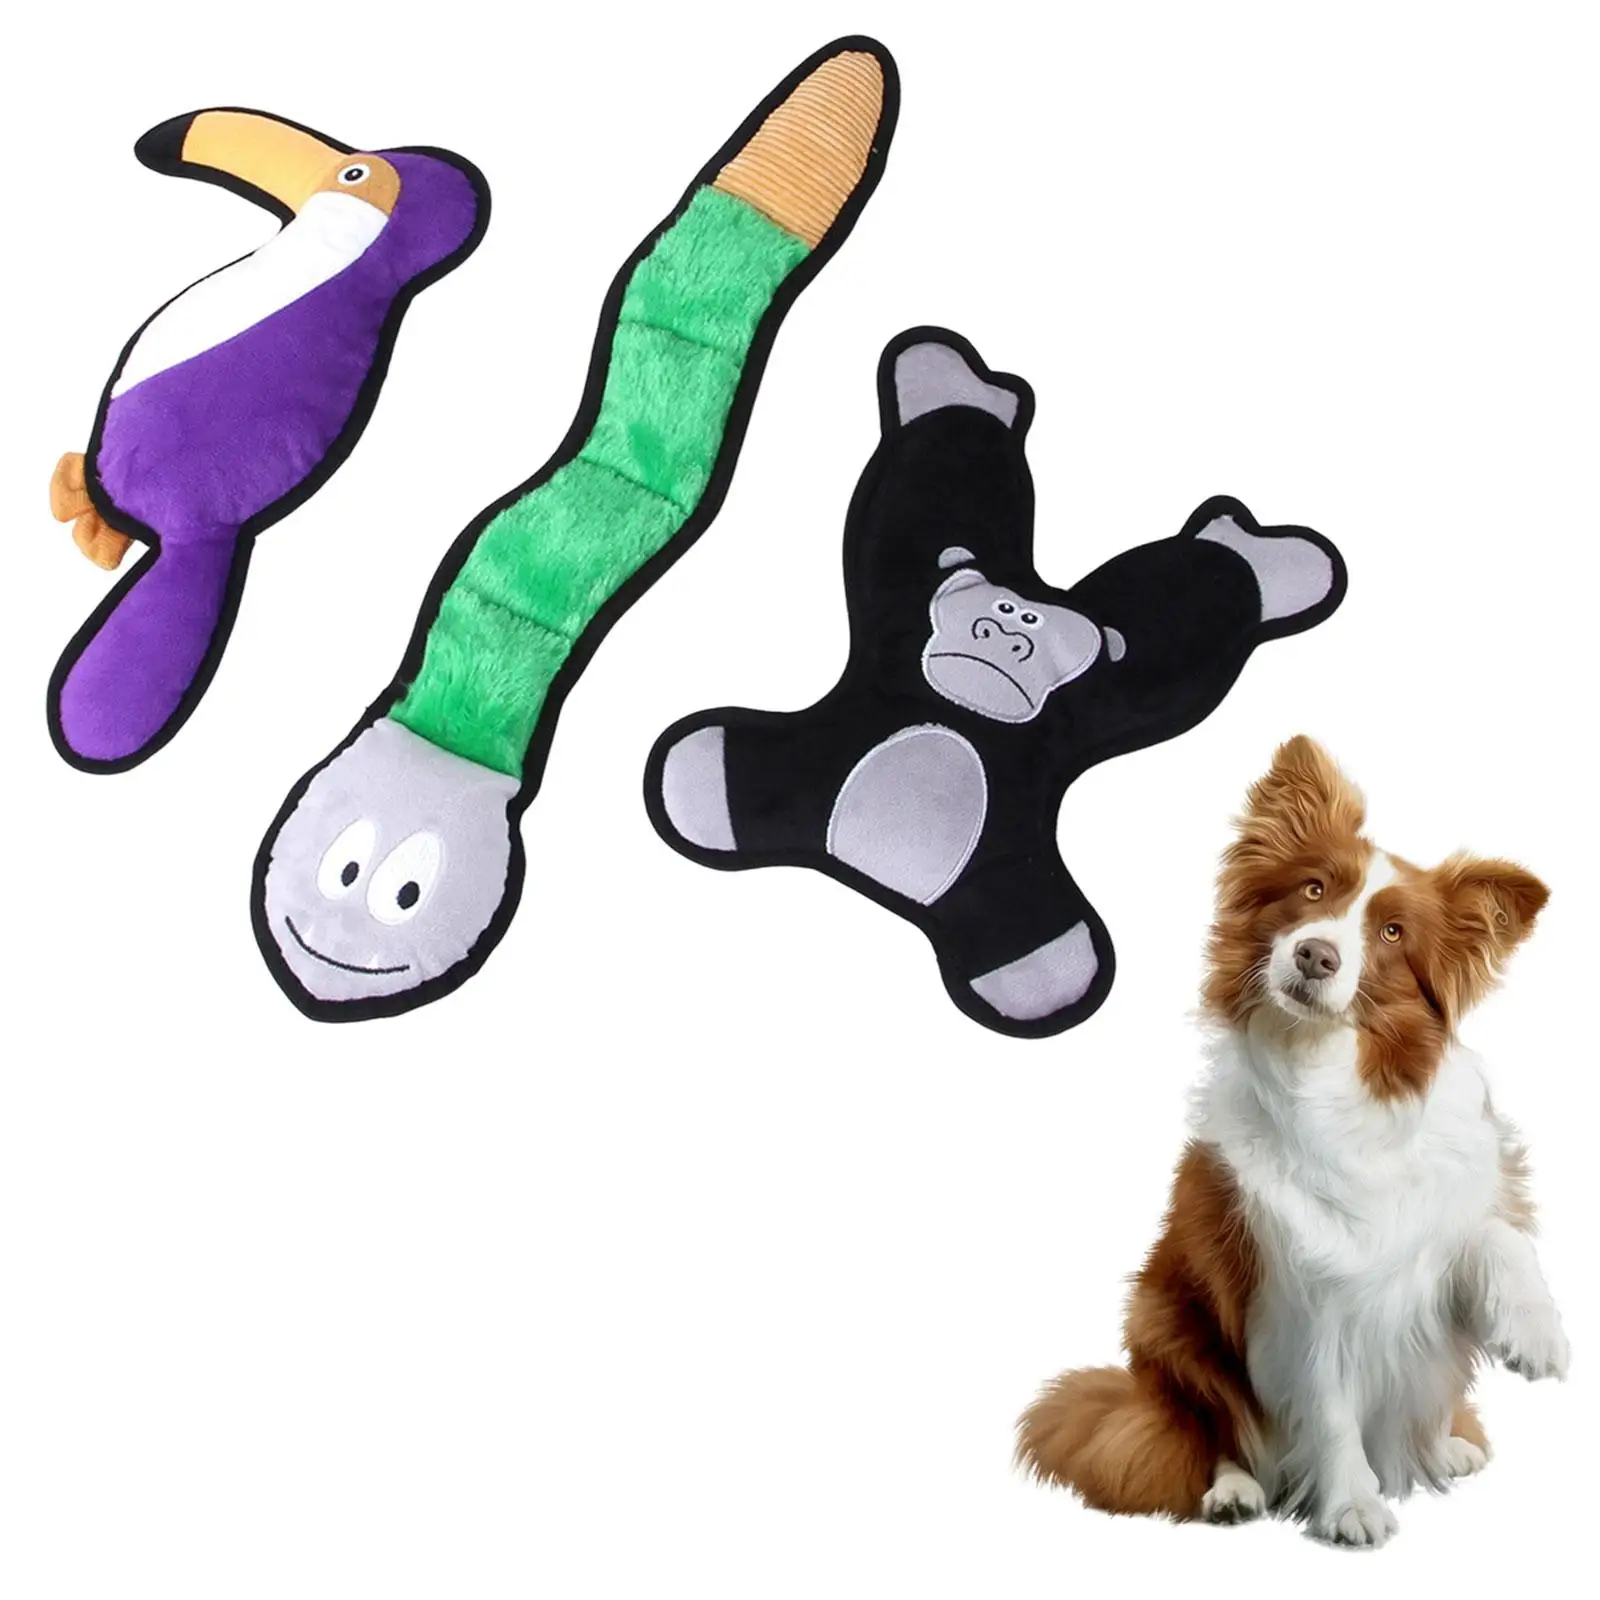 3 Pieces Plush Squeaky Pets Toys Unstuffed Dog Chew Toys for Cute Animal Big Medium Small Pet Puppy Bite Resistant Interactive